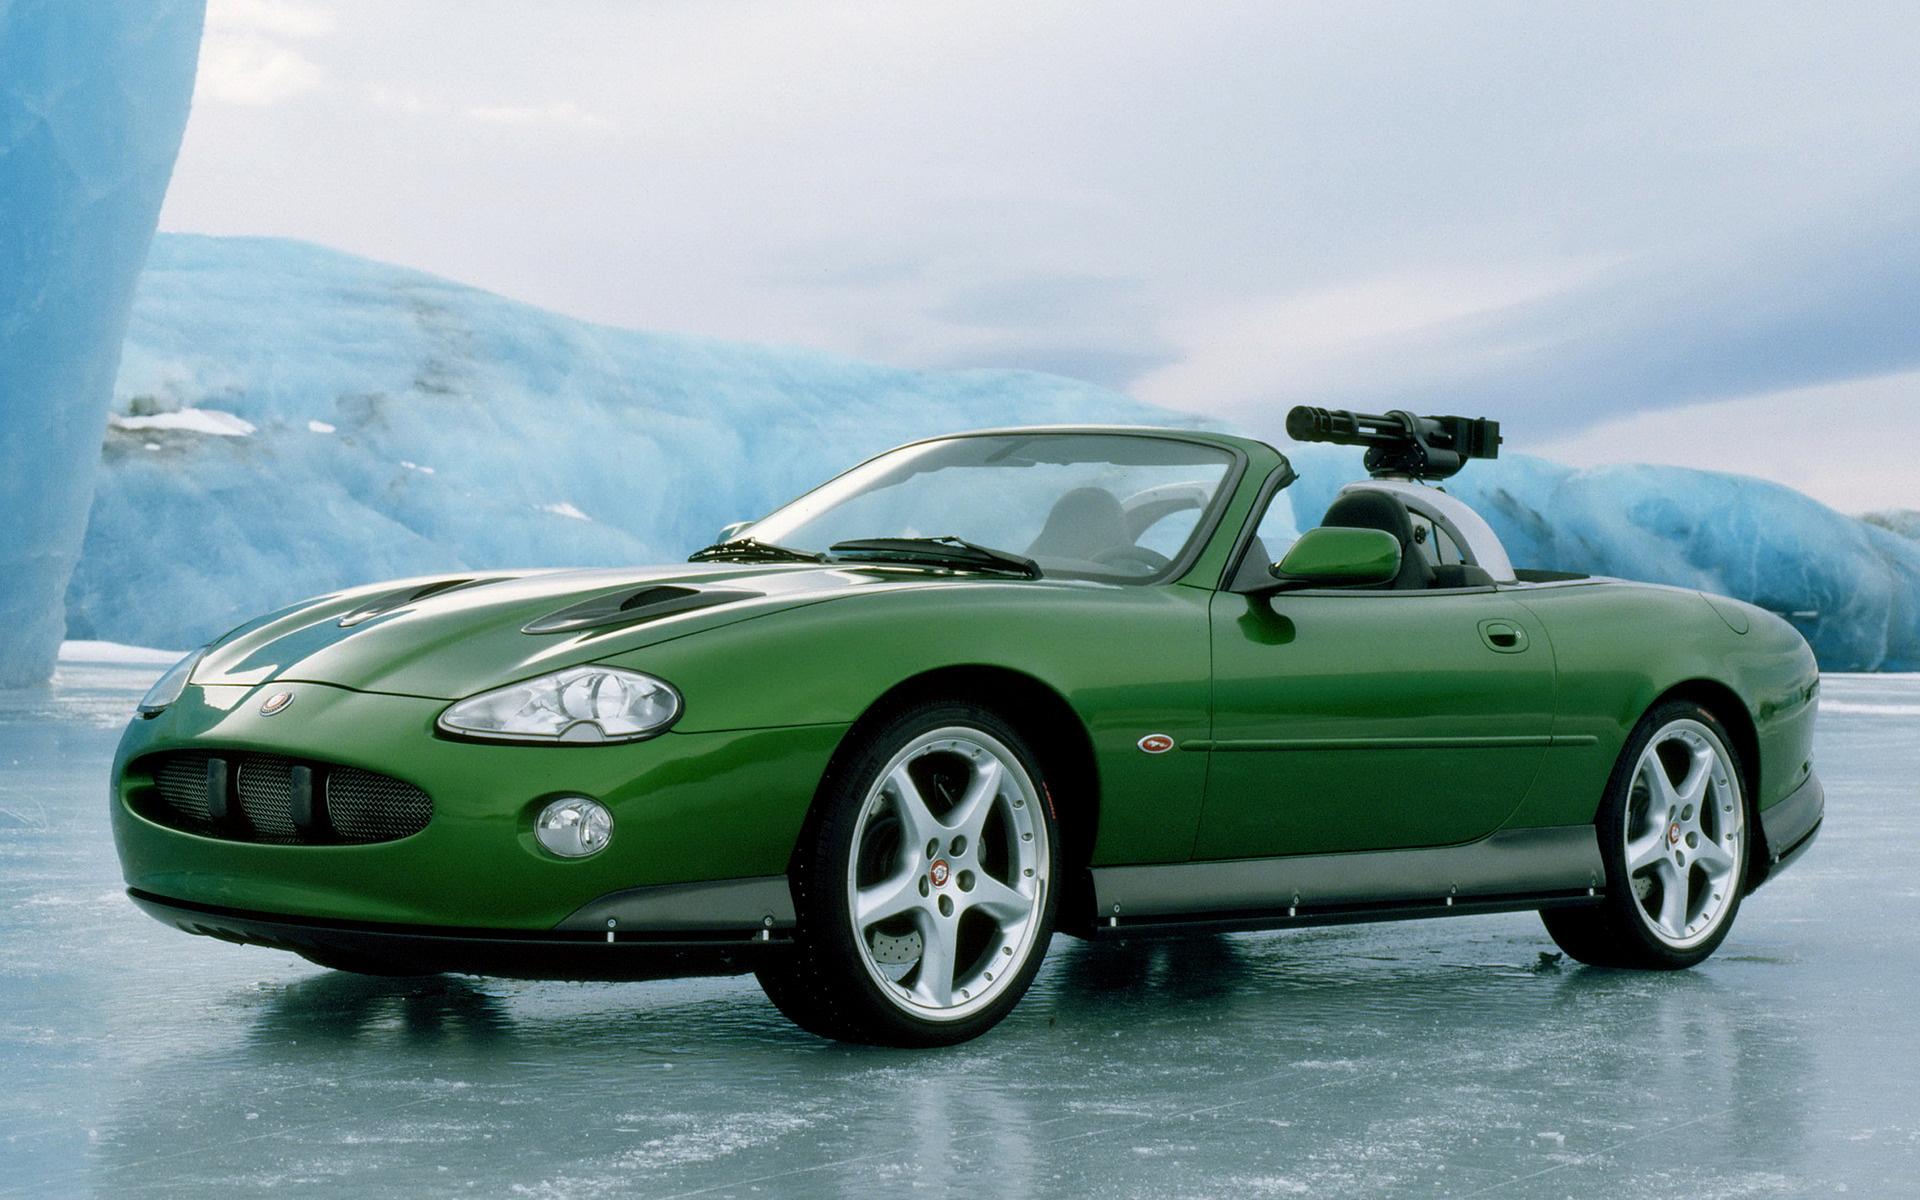 Jaguar XKR Convertible 007 Die Another Day and HD